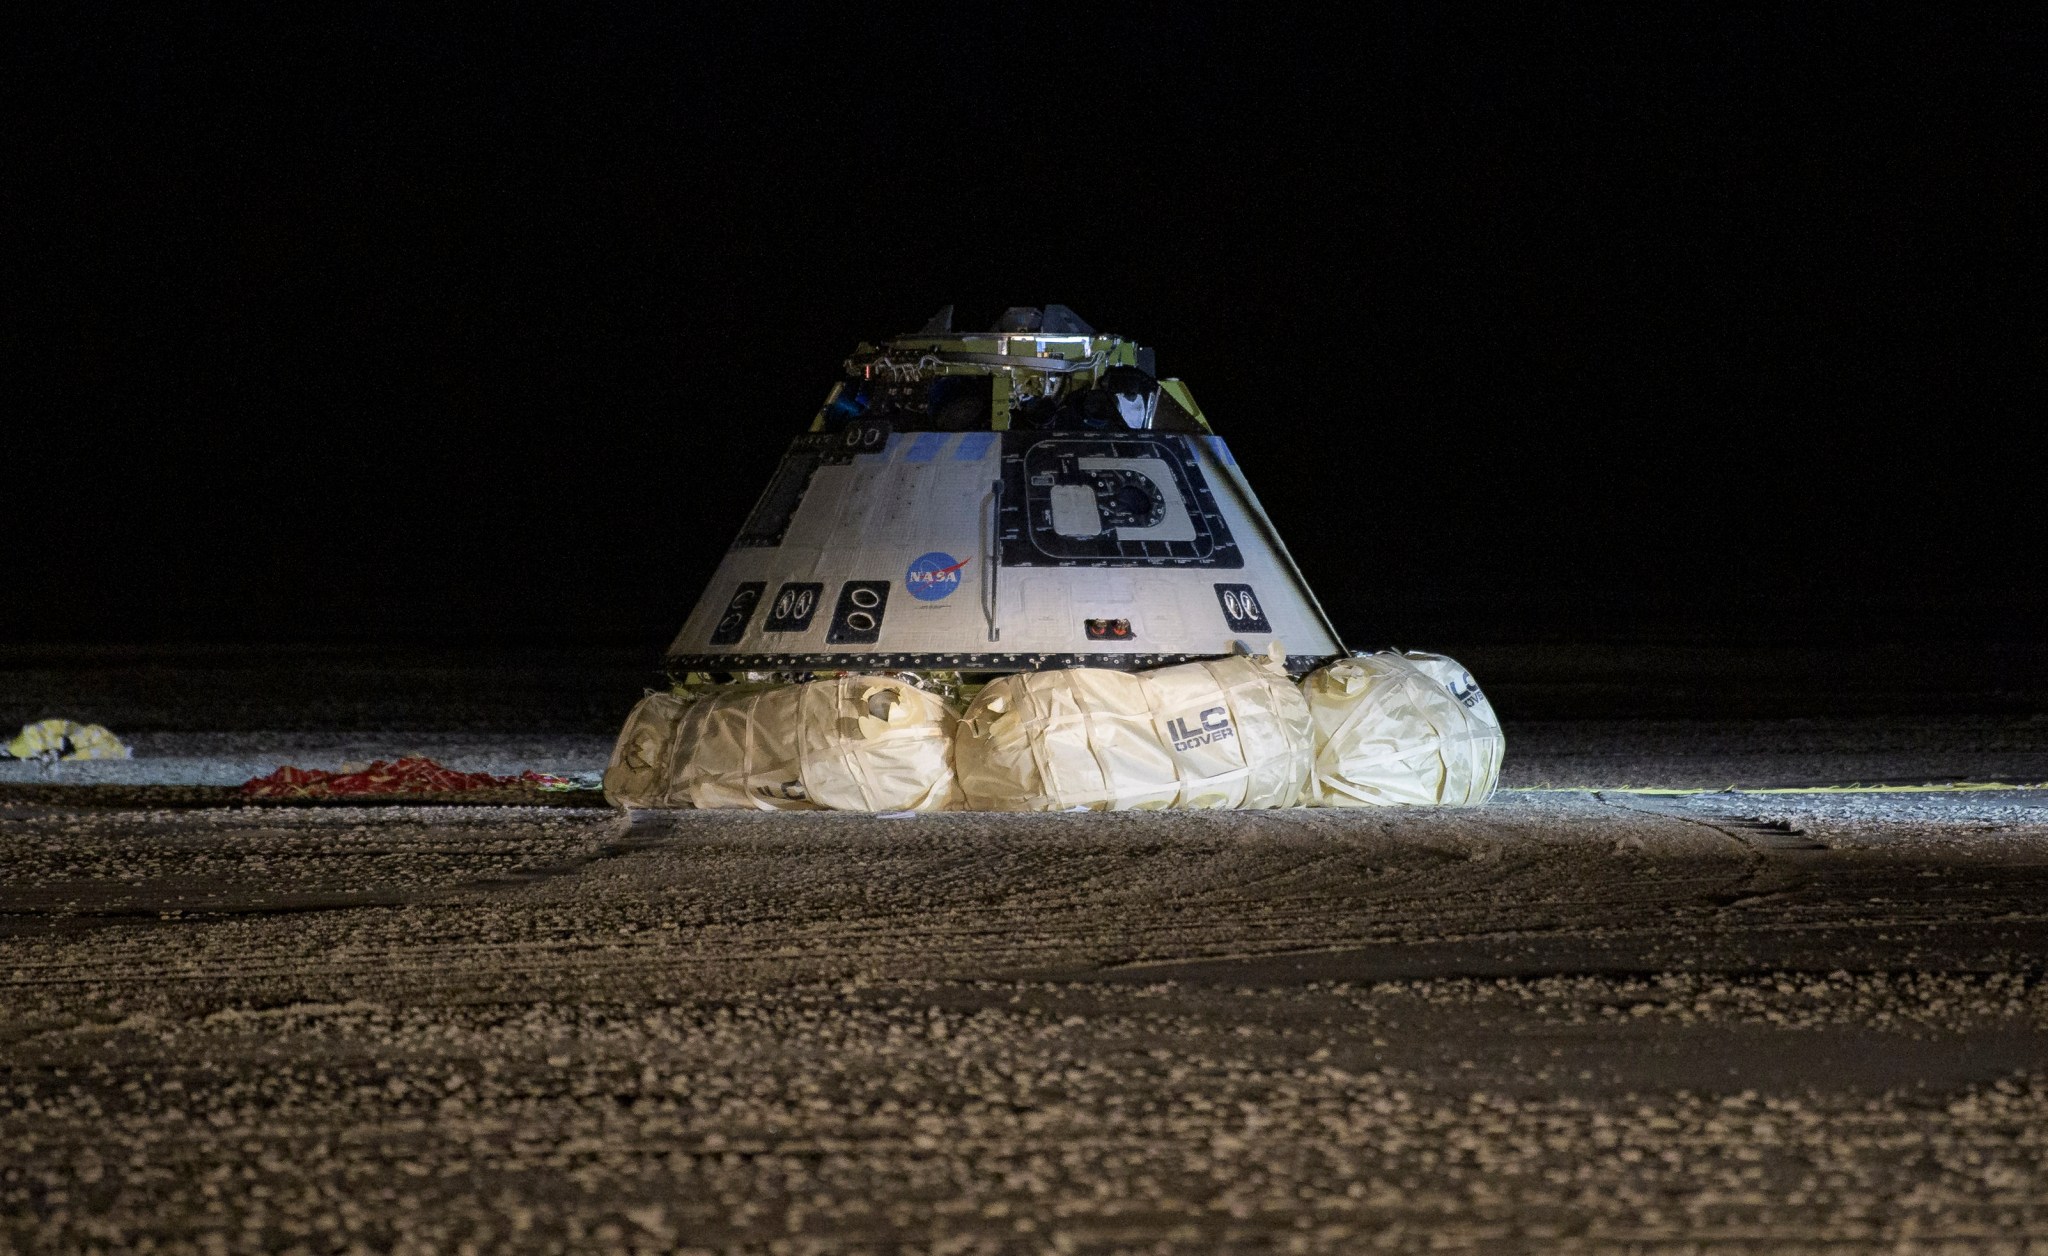 Boeing CST-100 Starliner spacecraft is seen after it landed in White Sands, New Mexico, Sunday, Dec. 22, 2019